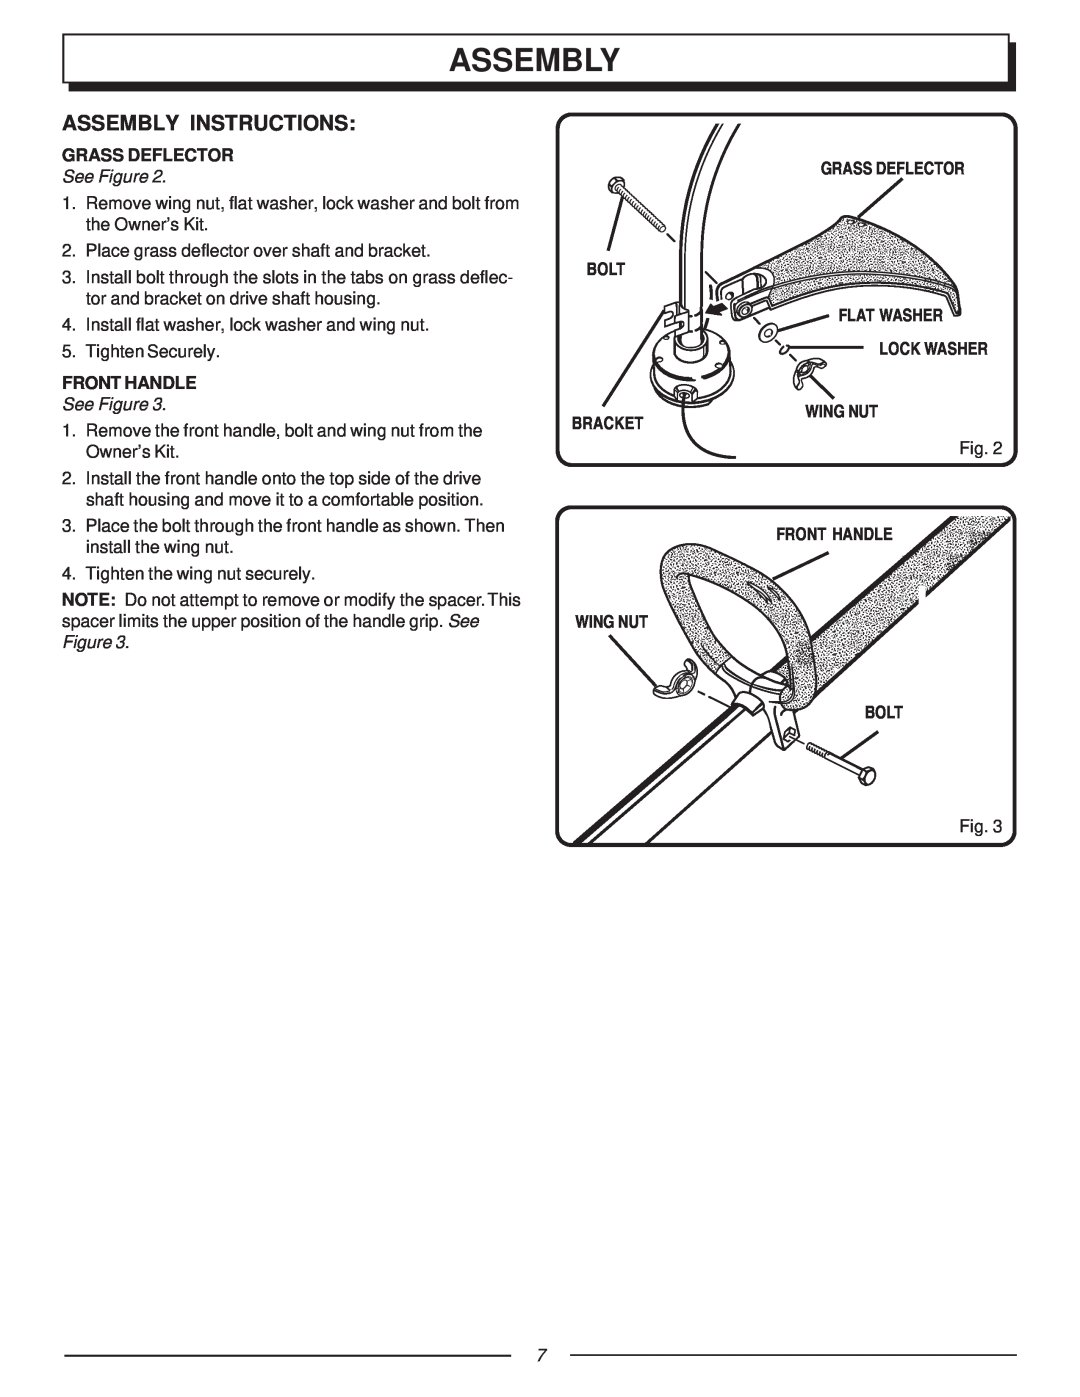 Homelite UT70121A manual Assembly Instructions, Grass Deflector, See Figure, Bolt Bracket, Wing Nut, Front Handle 